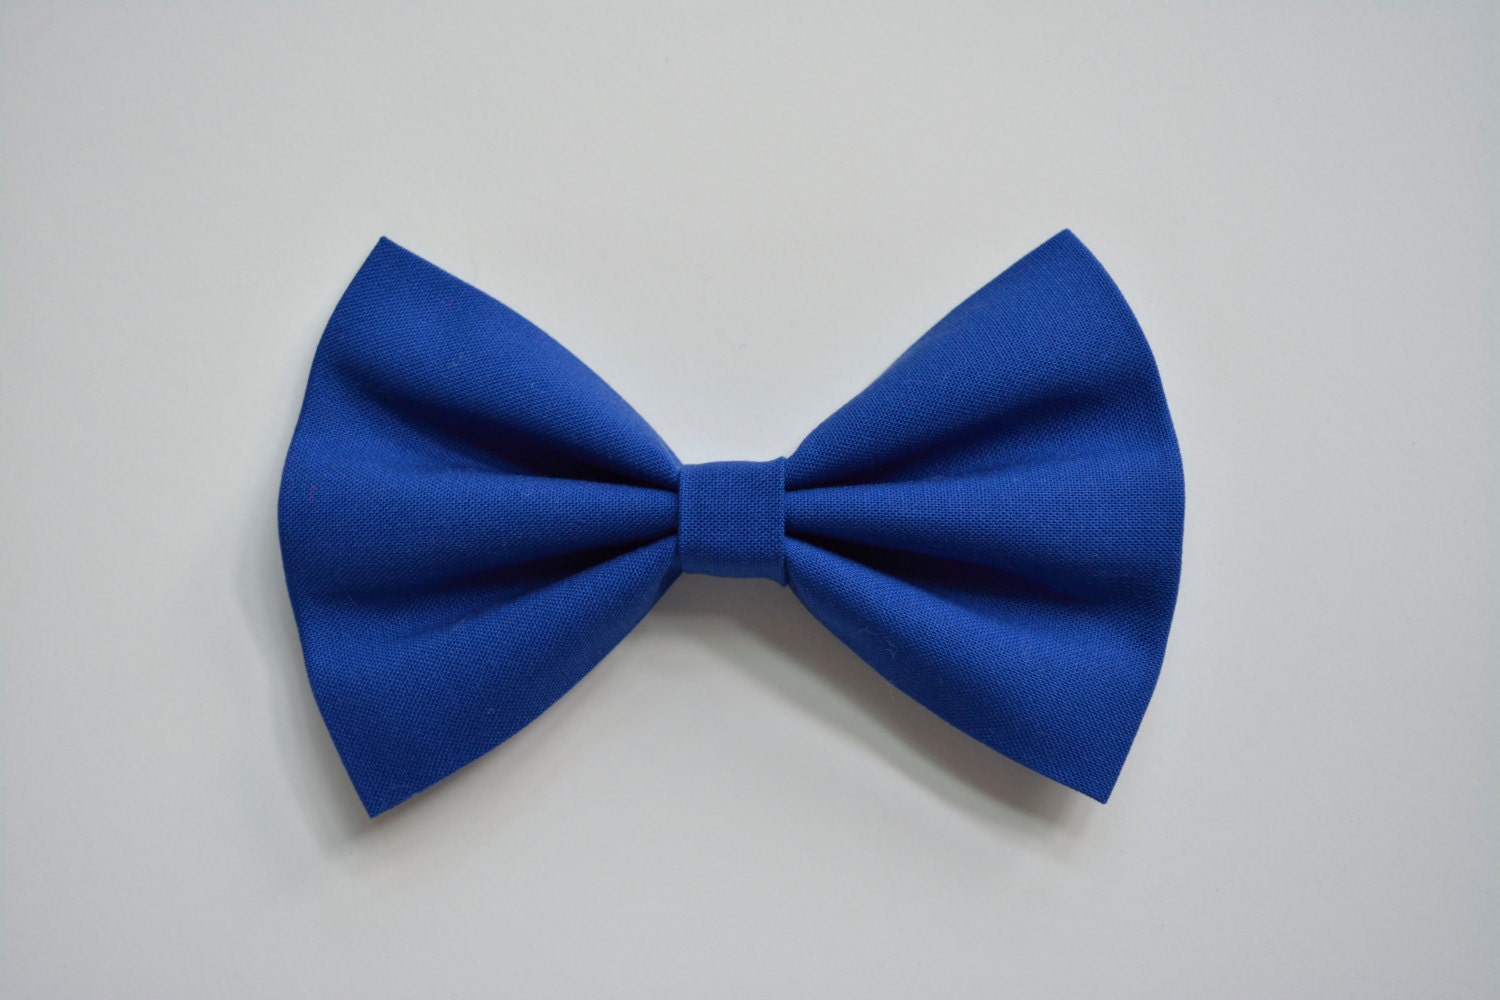 Large Blue Hair Bow - Bow Tie Headband with Bow Detail - wide 3